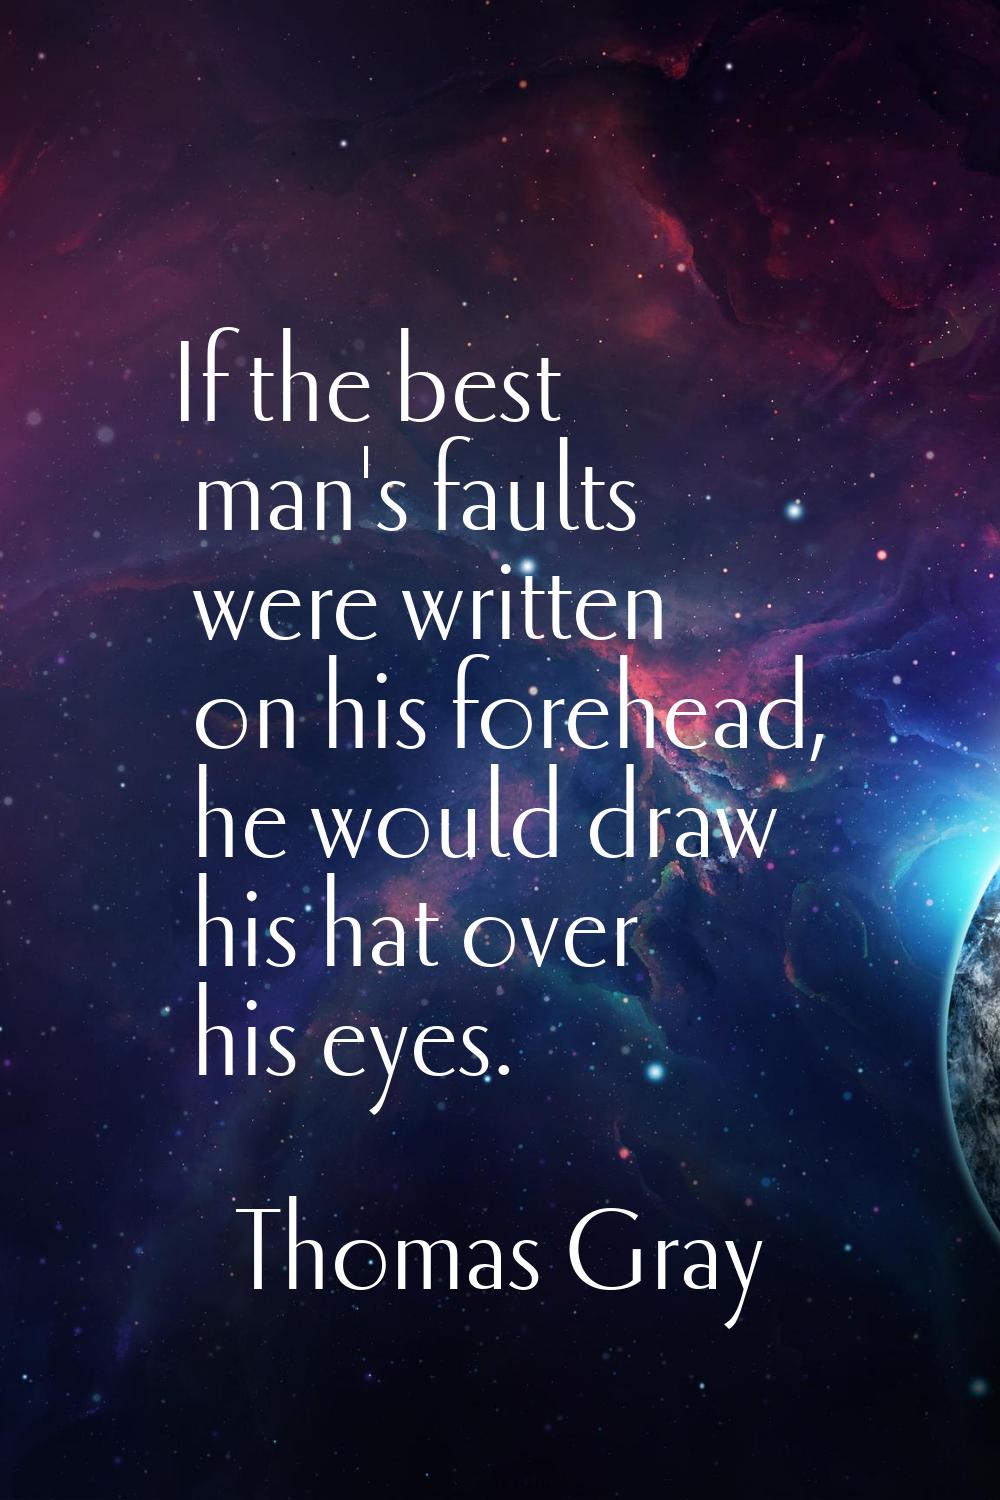 If the best man's faults were written on his forehead, he would draw his hat over his eyes.